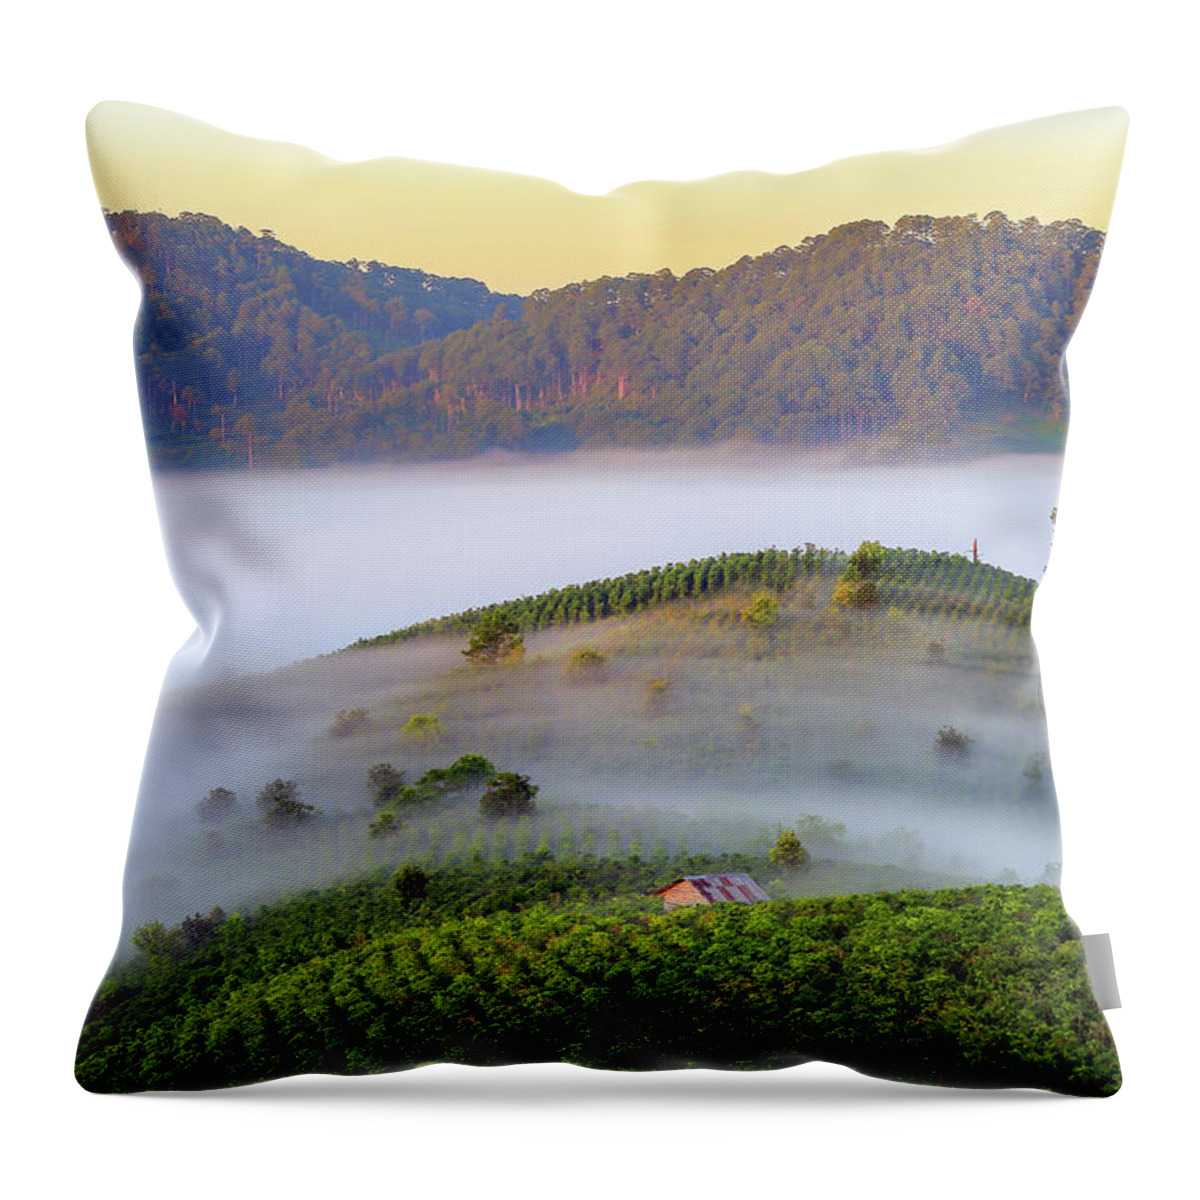 Awesome Throw Pillow featuring the photograph Feeling Of The Fog by Khanh Bui Phu